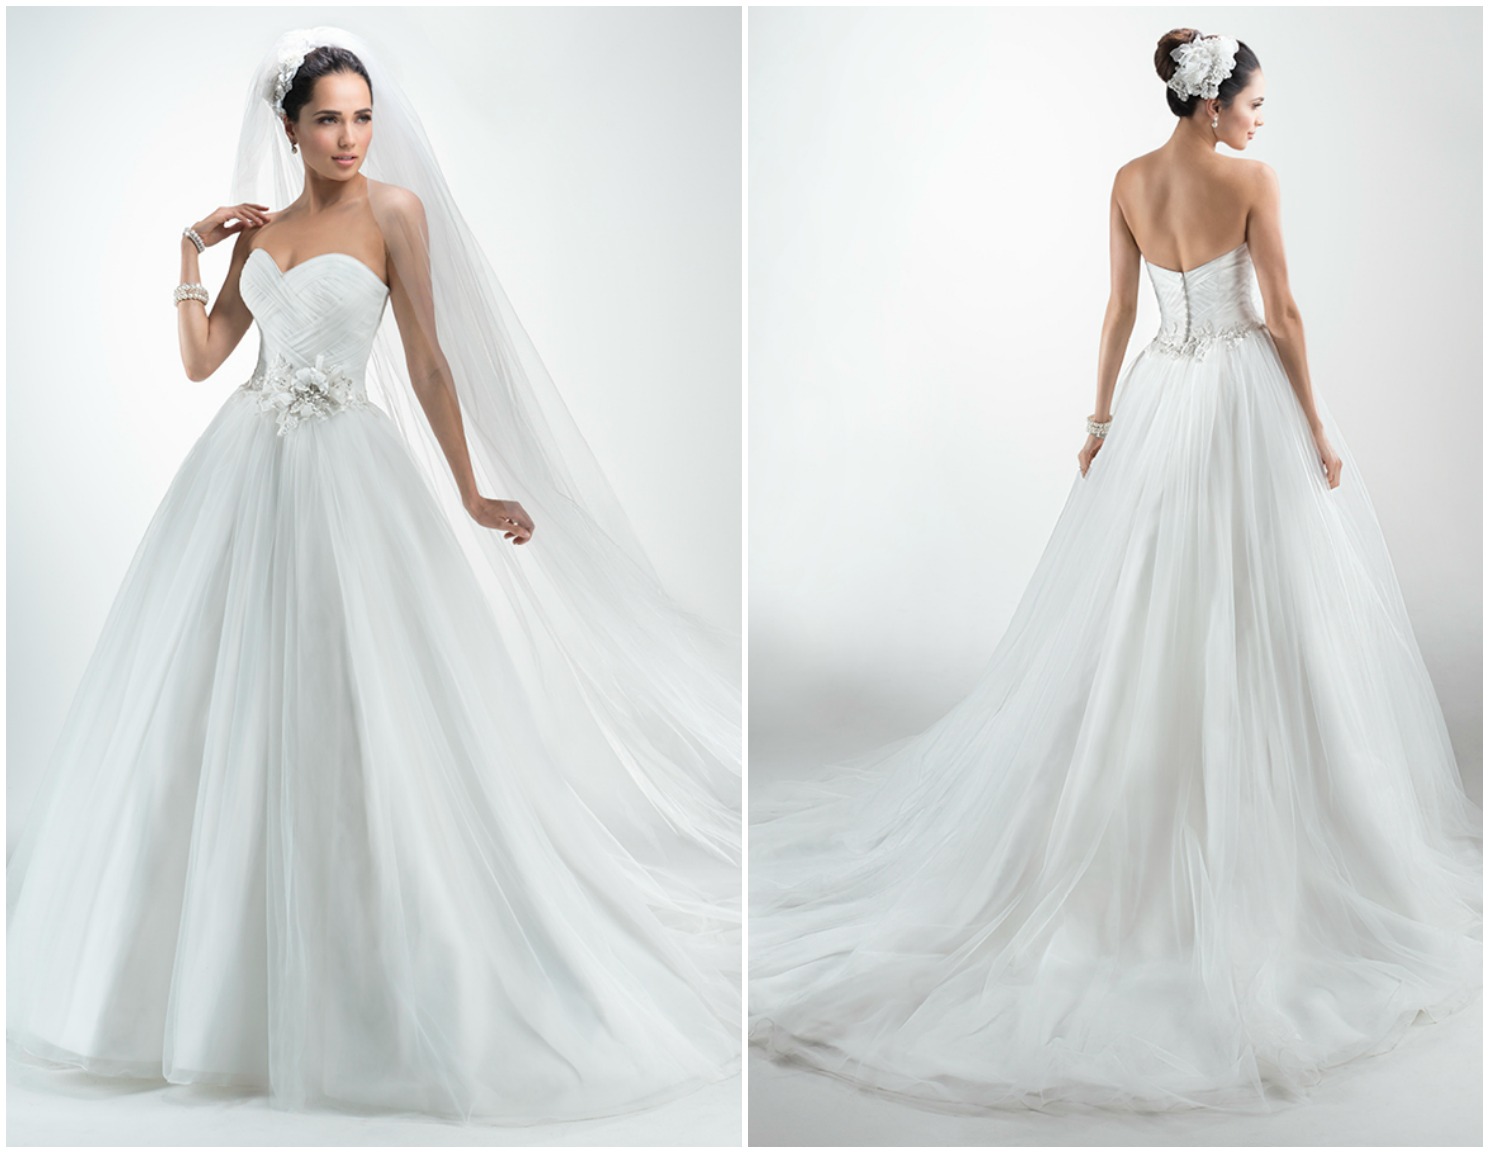 <a href="http://www.maggiesottero.com/dress.aspx?style=4MT943" target="_blank">Maggie Sottero</a>